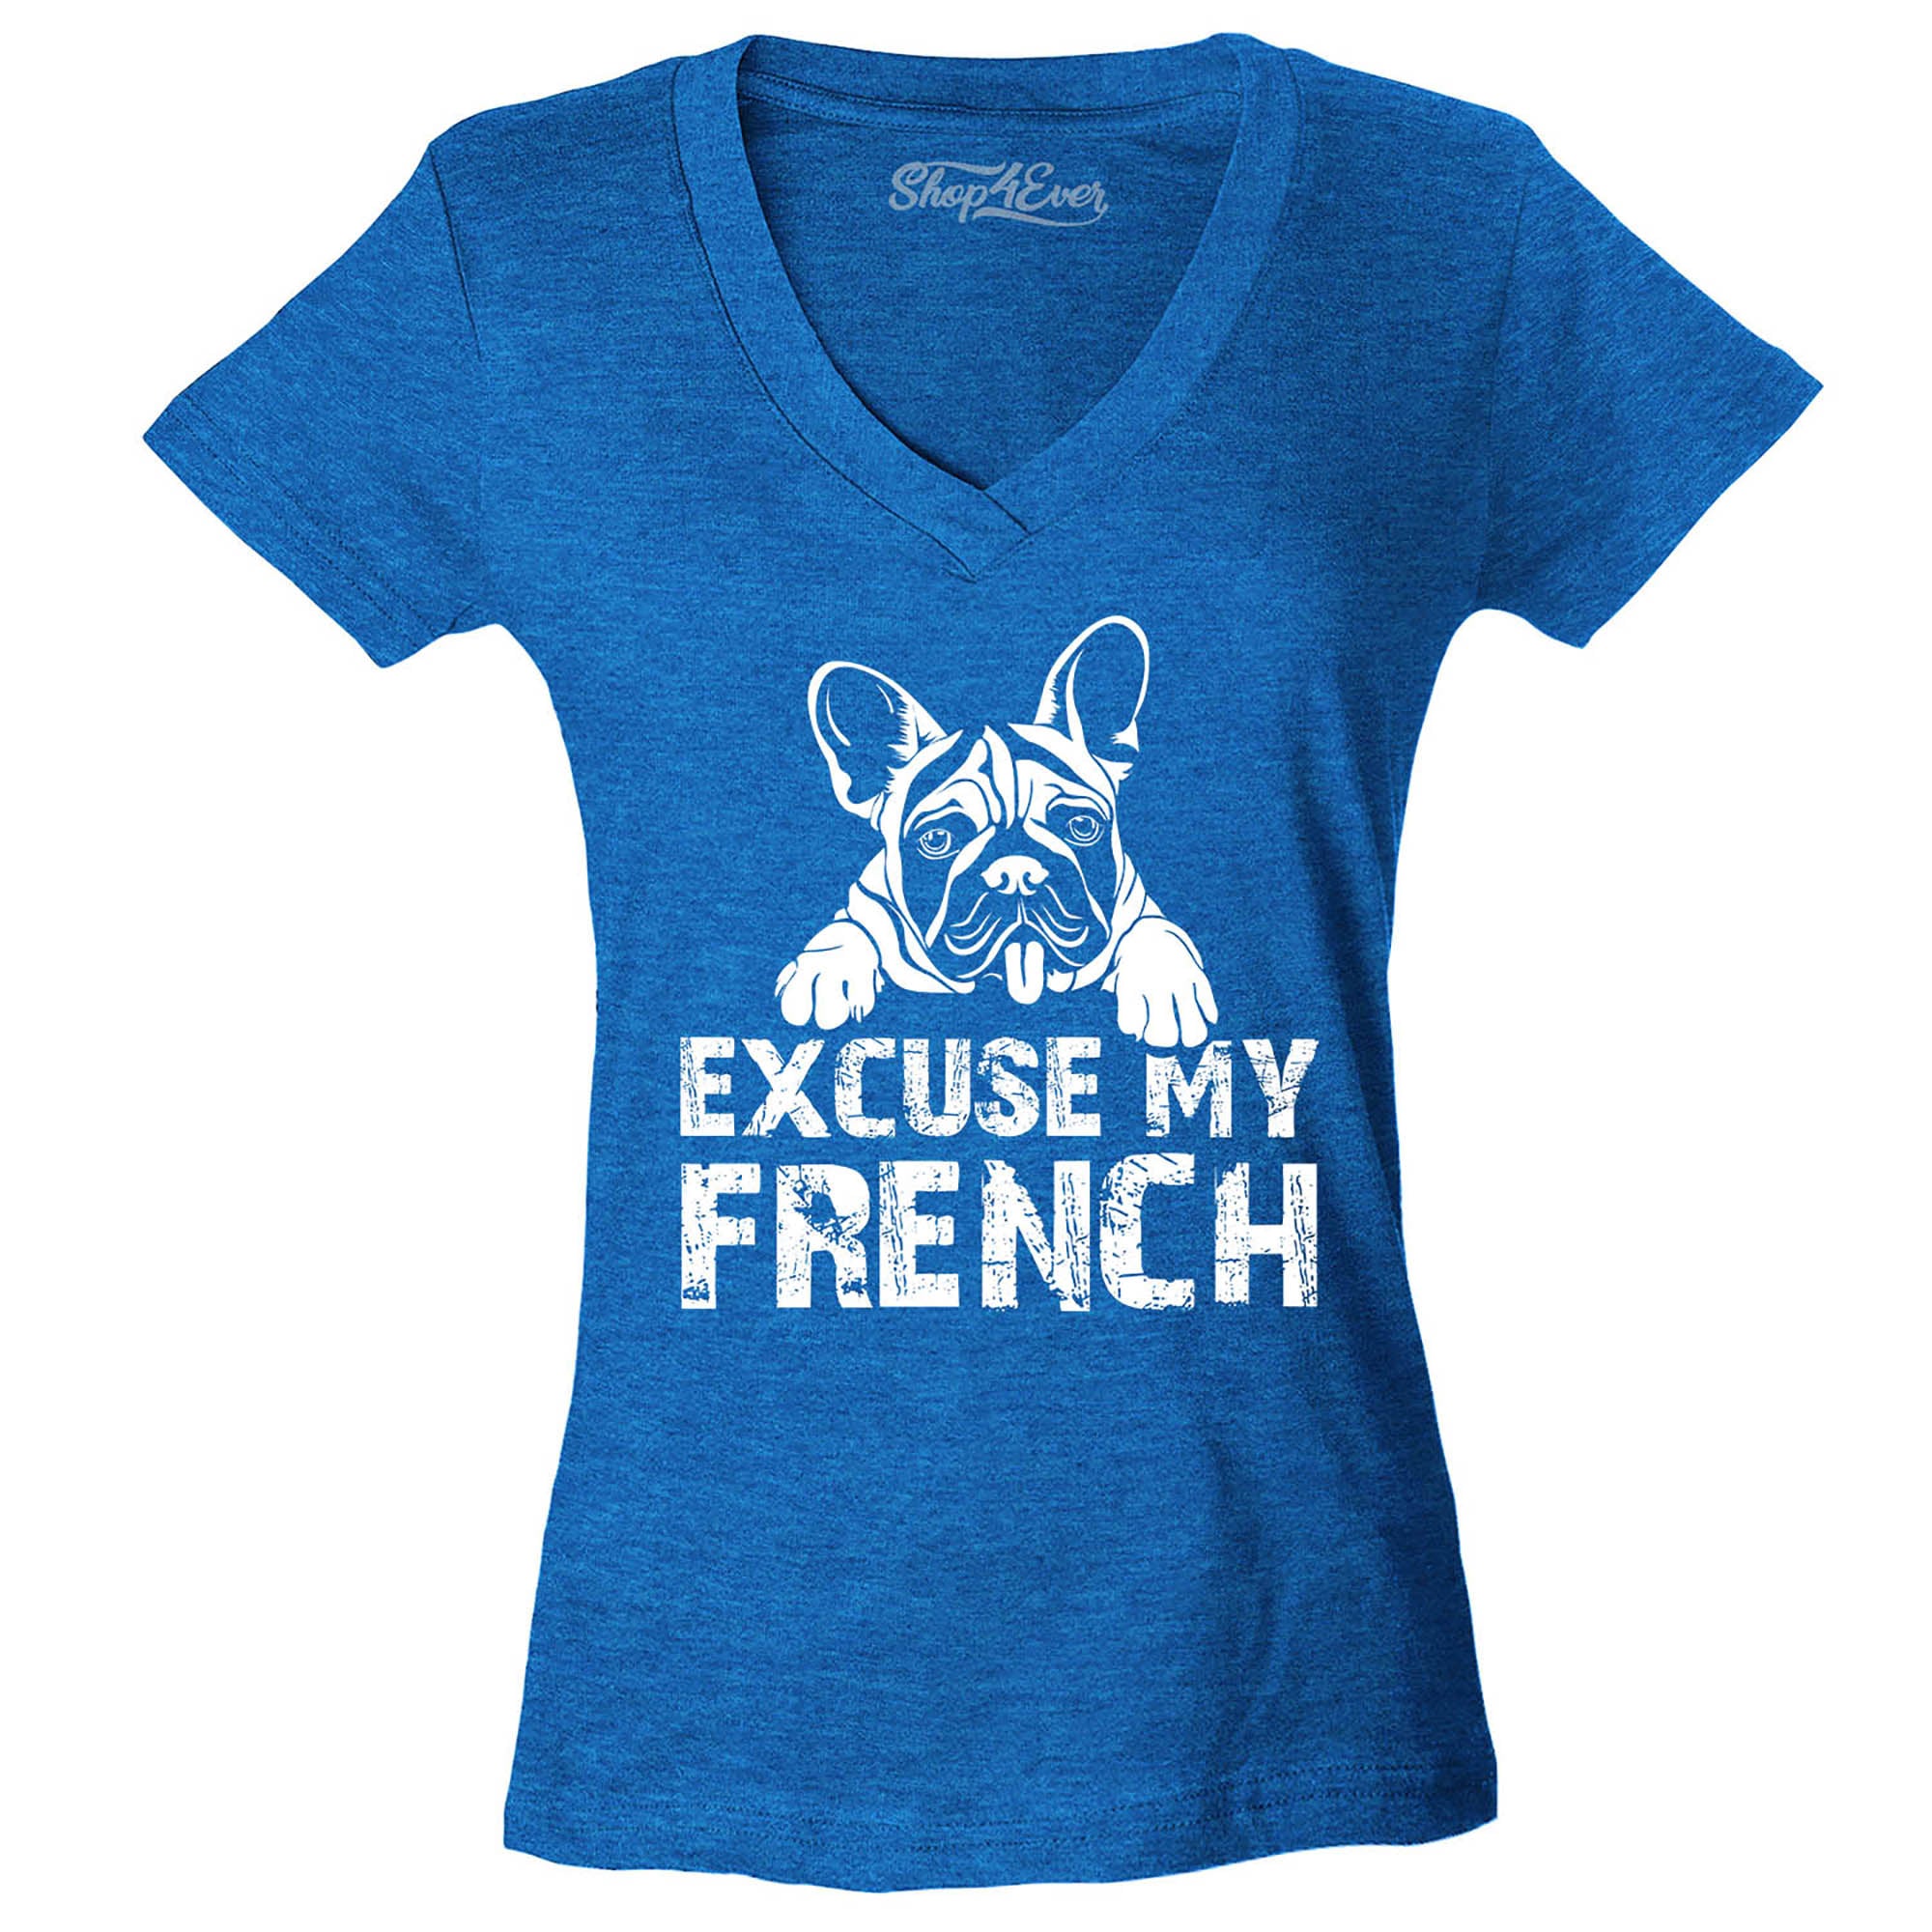 Excuse My French Women's V-Neck T-Shirt Slim Fit